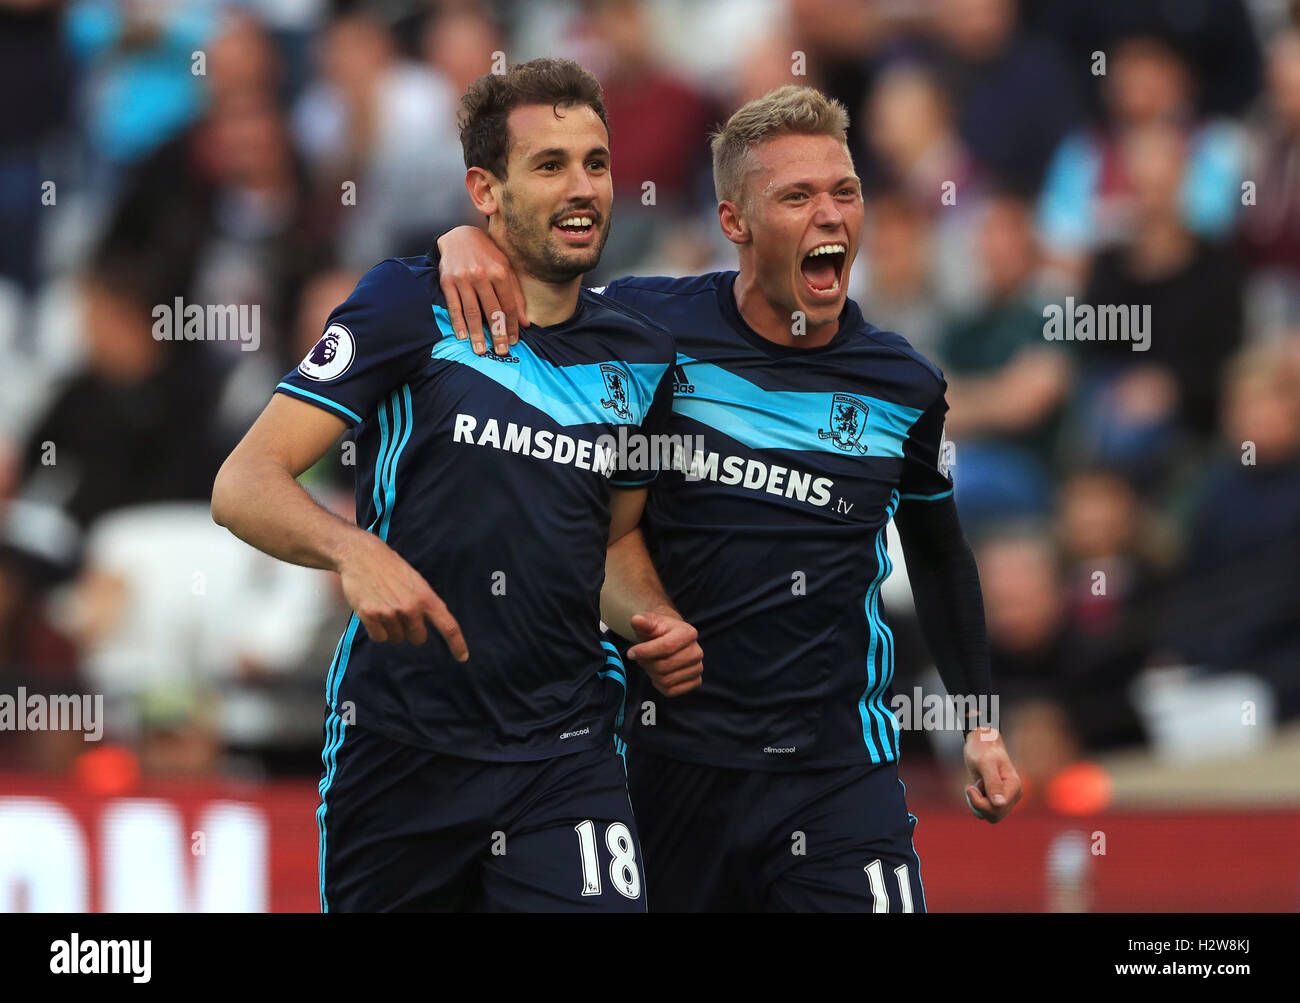 Middlesbrough's Cristhian Stuani (left) celebrates scoring his side's first goal with team-mate Viktor Fischer during the Premier League match at London Stadium. Stock Photo